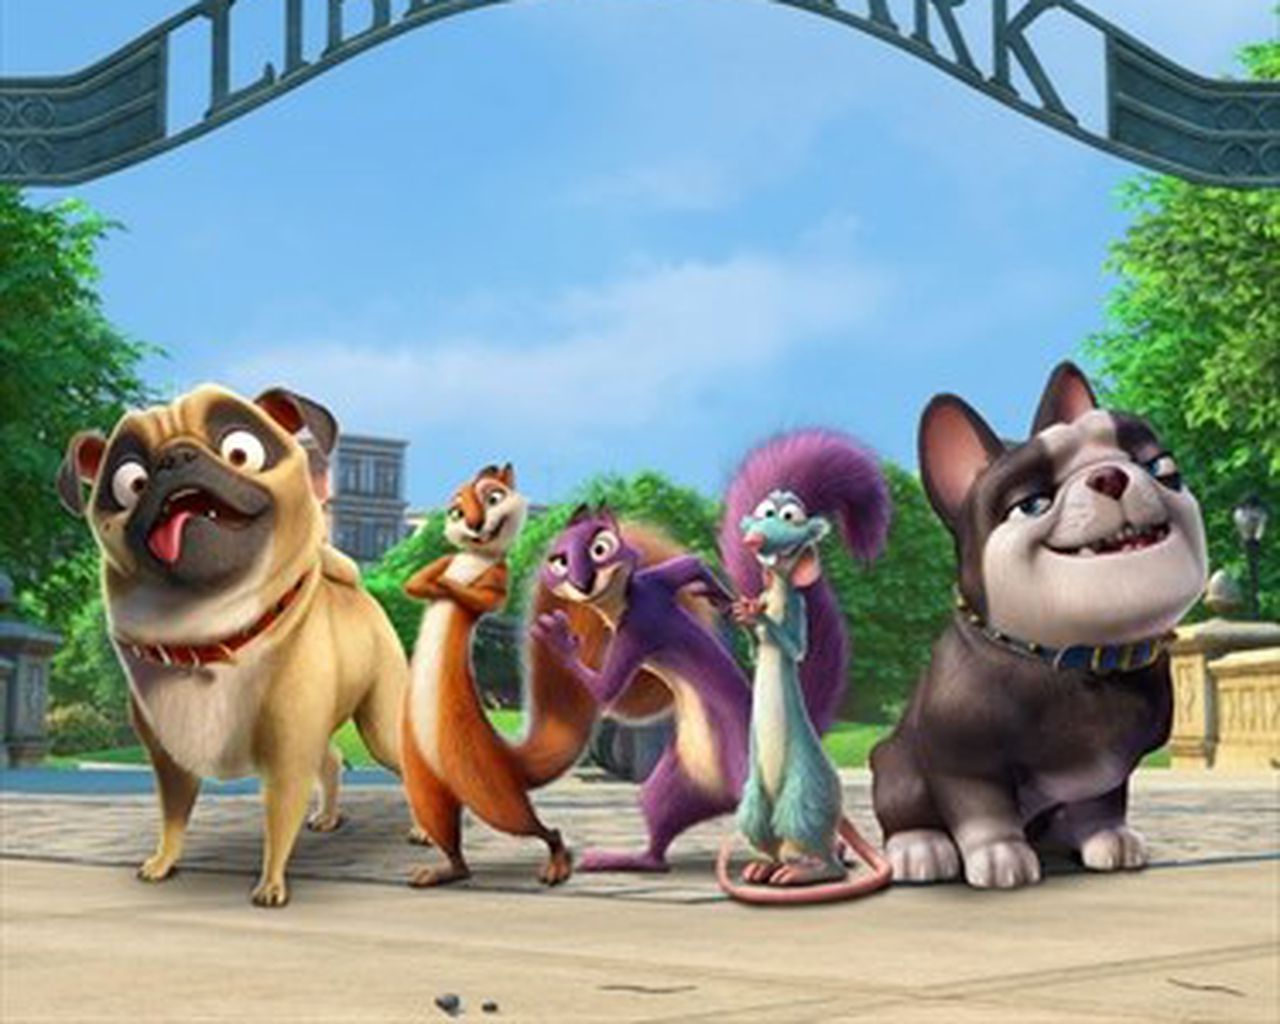 The Nut Job 2 2017 Wallpapers